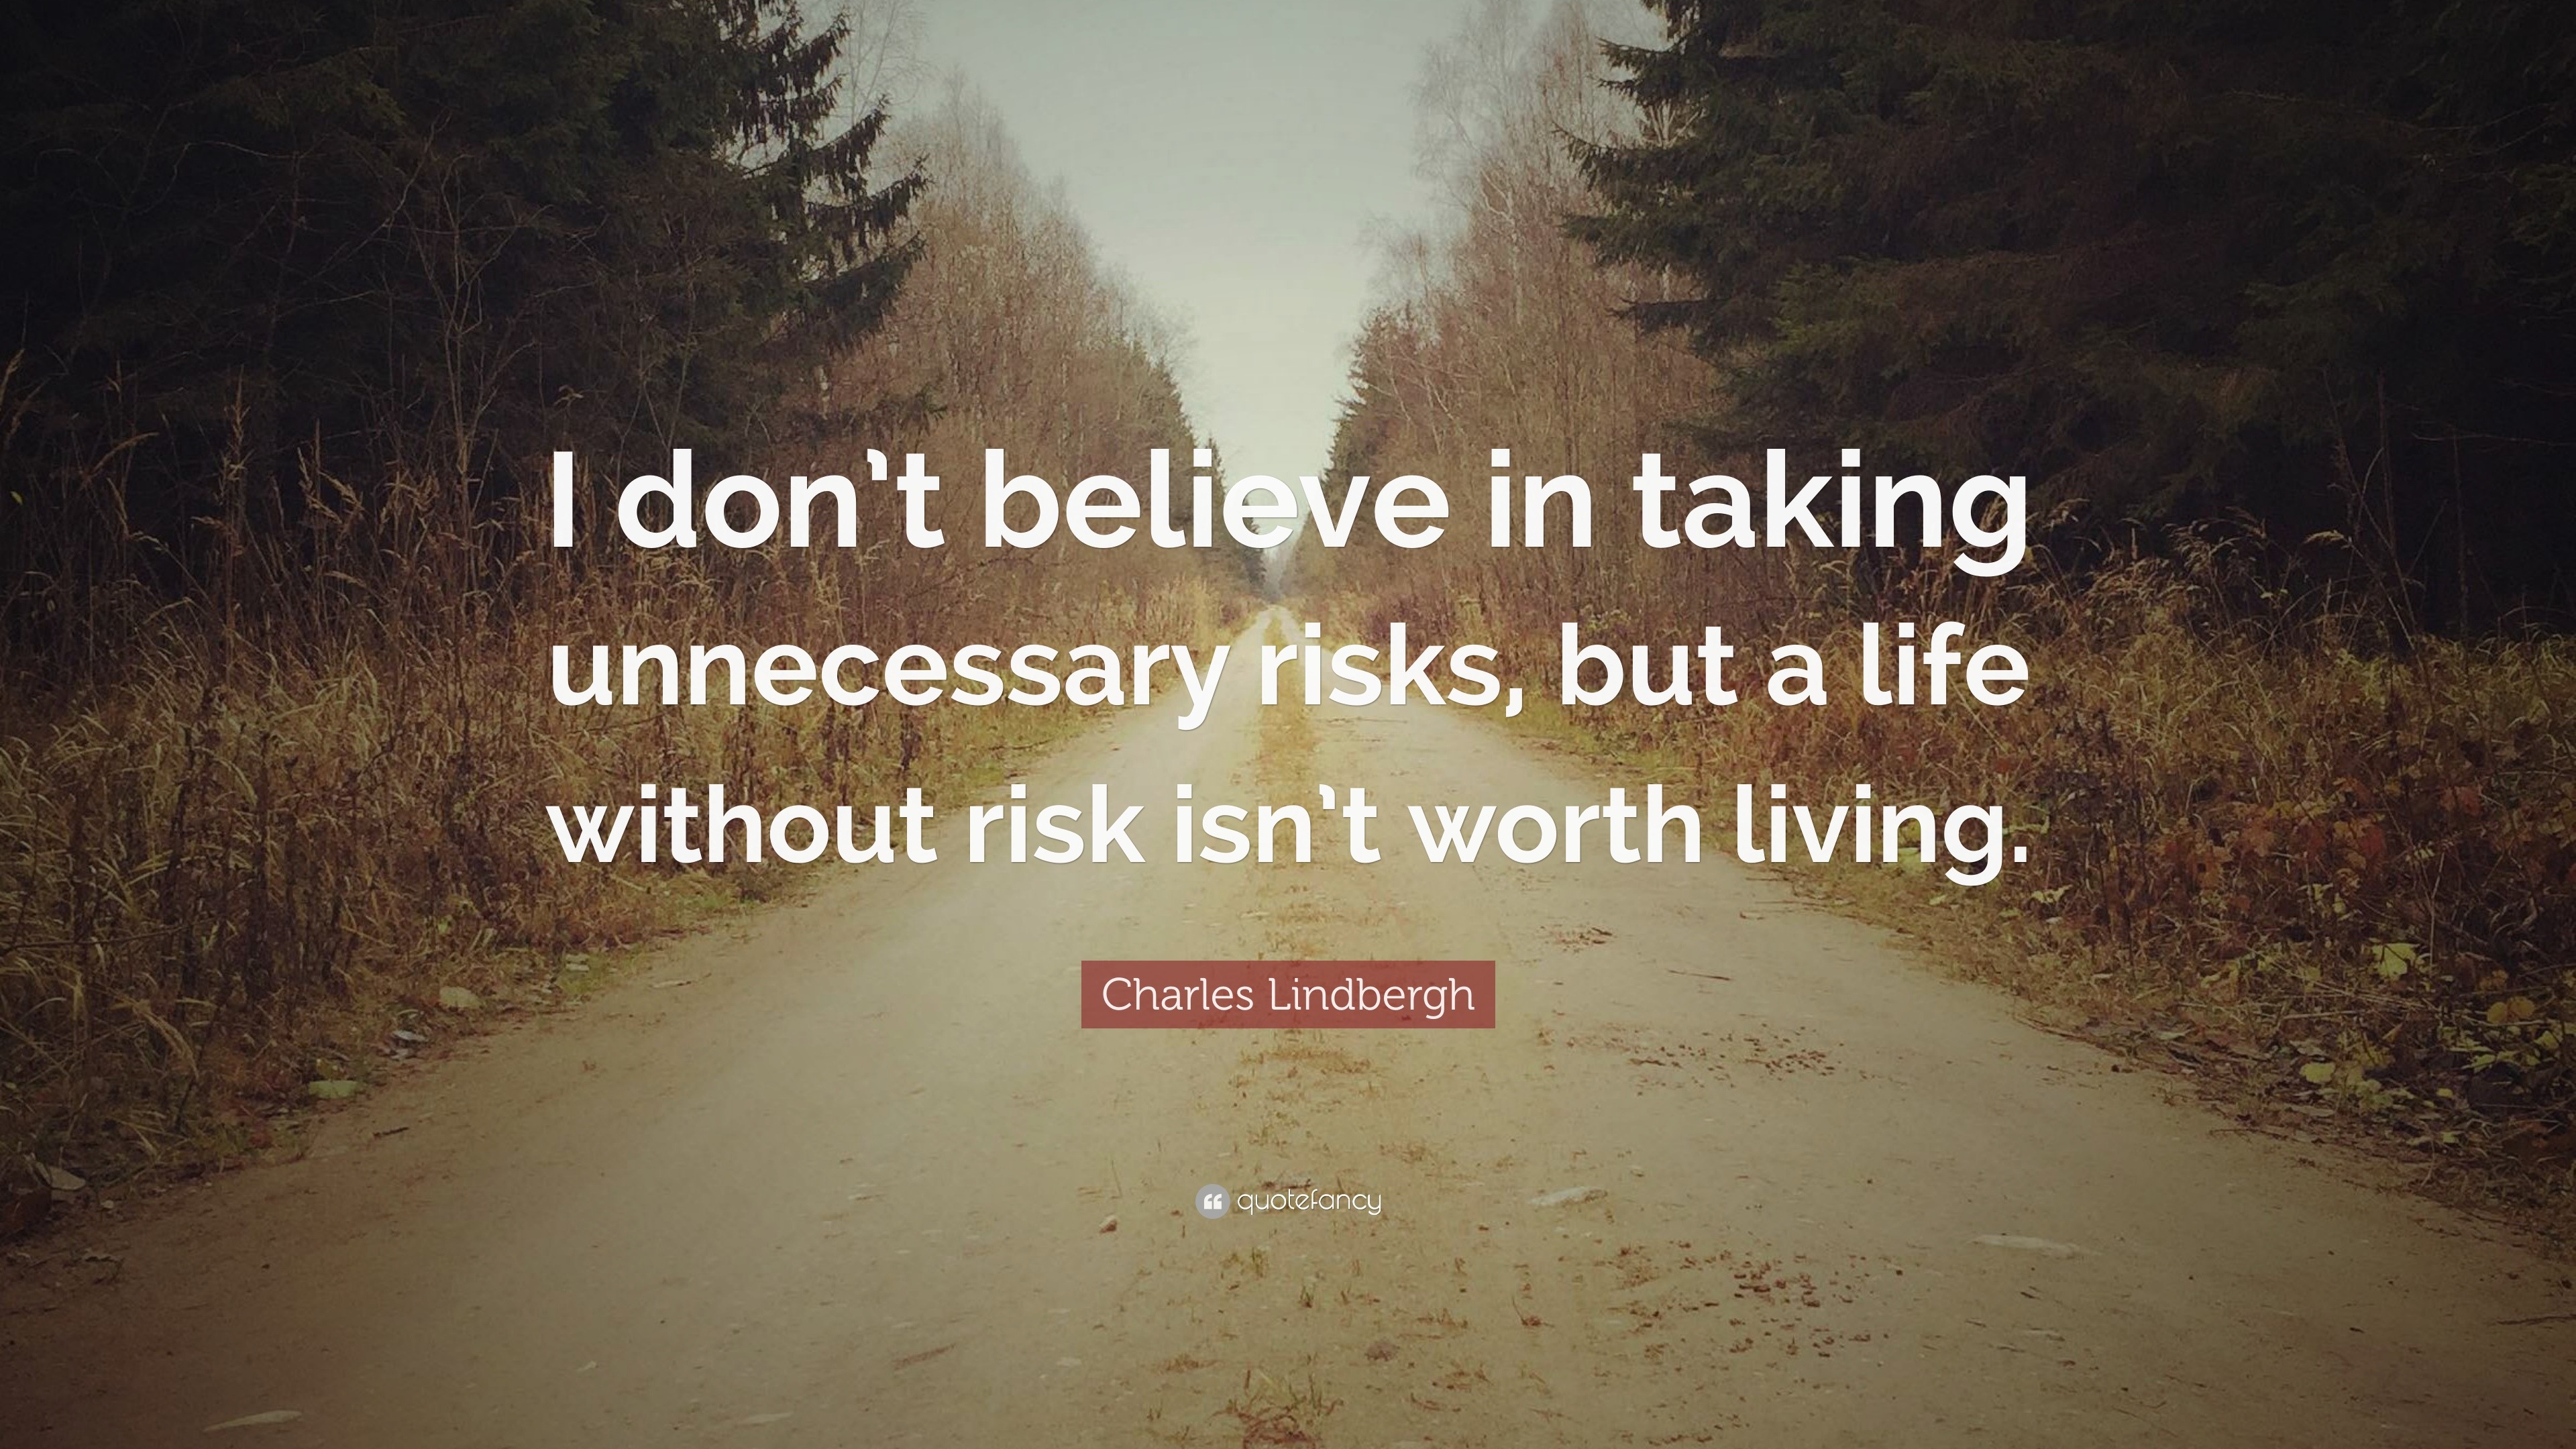 Charles Lindbergh Quote “I don t believe in taking unnecessary risks but